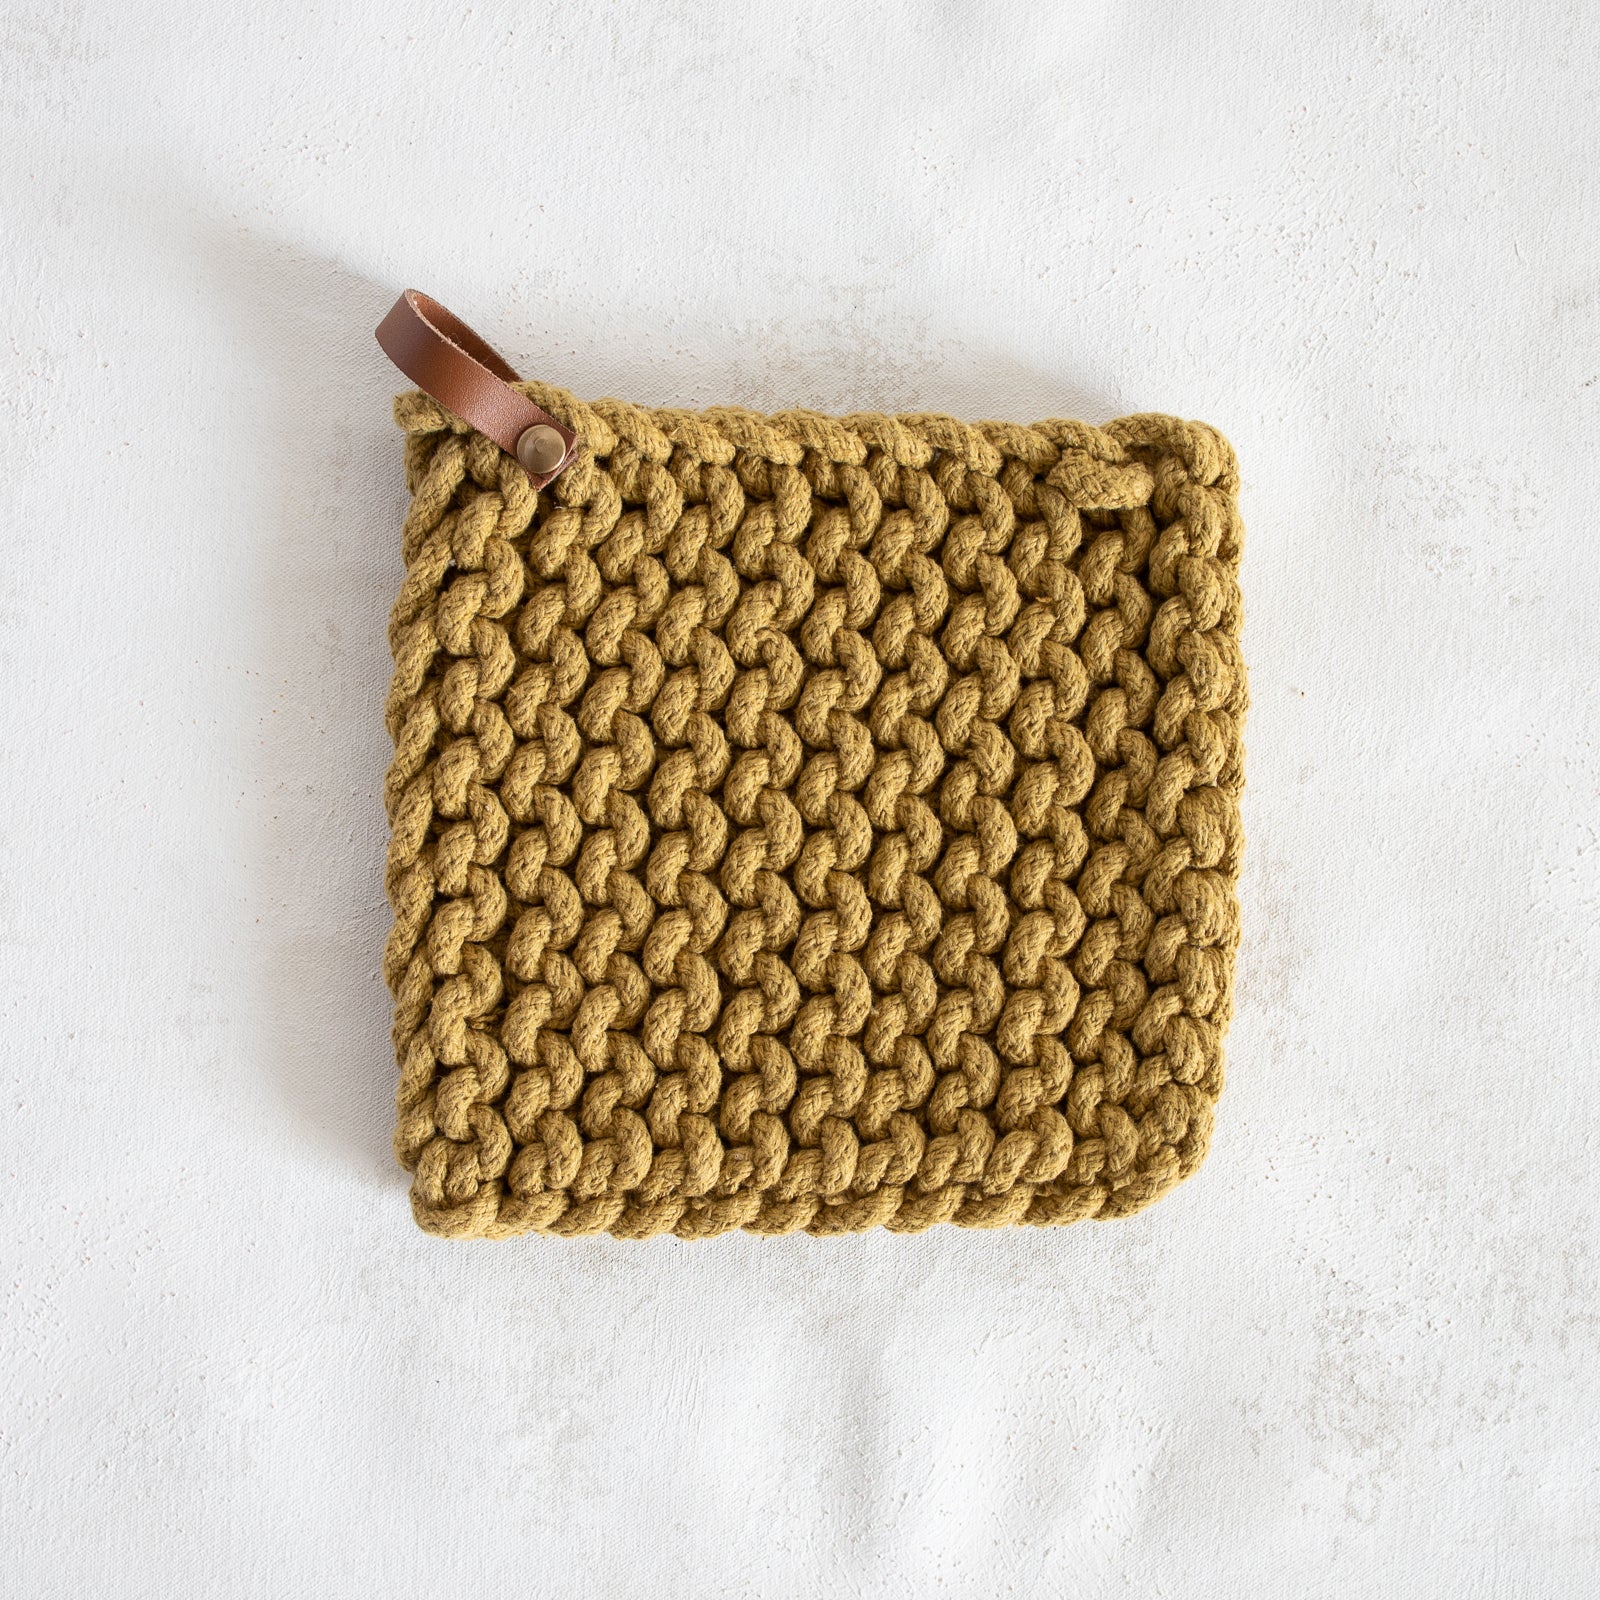 Leather Loop Crocheted Pot Holder